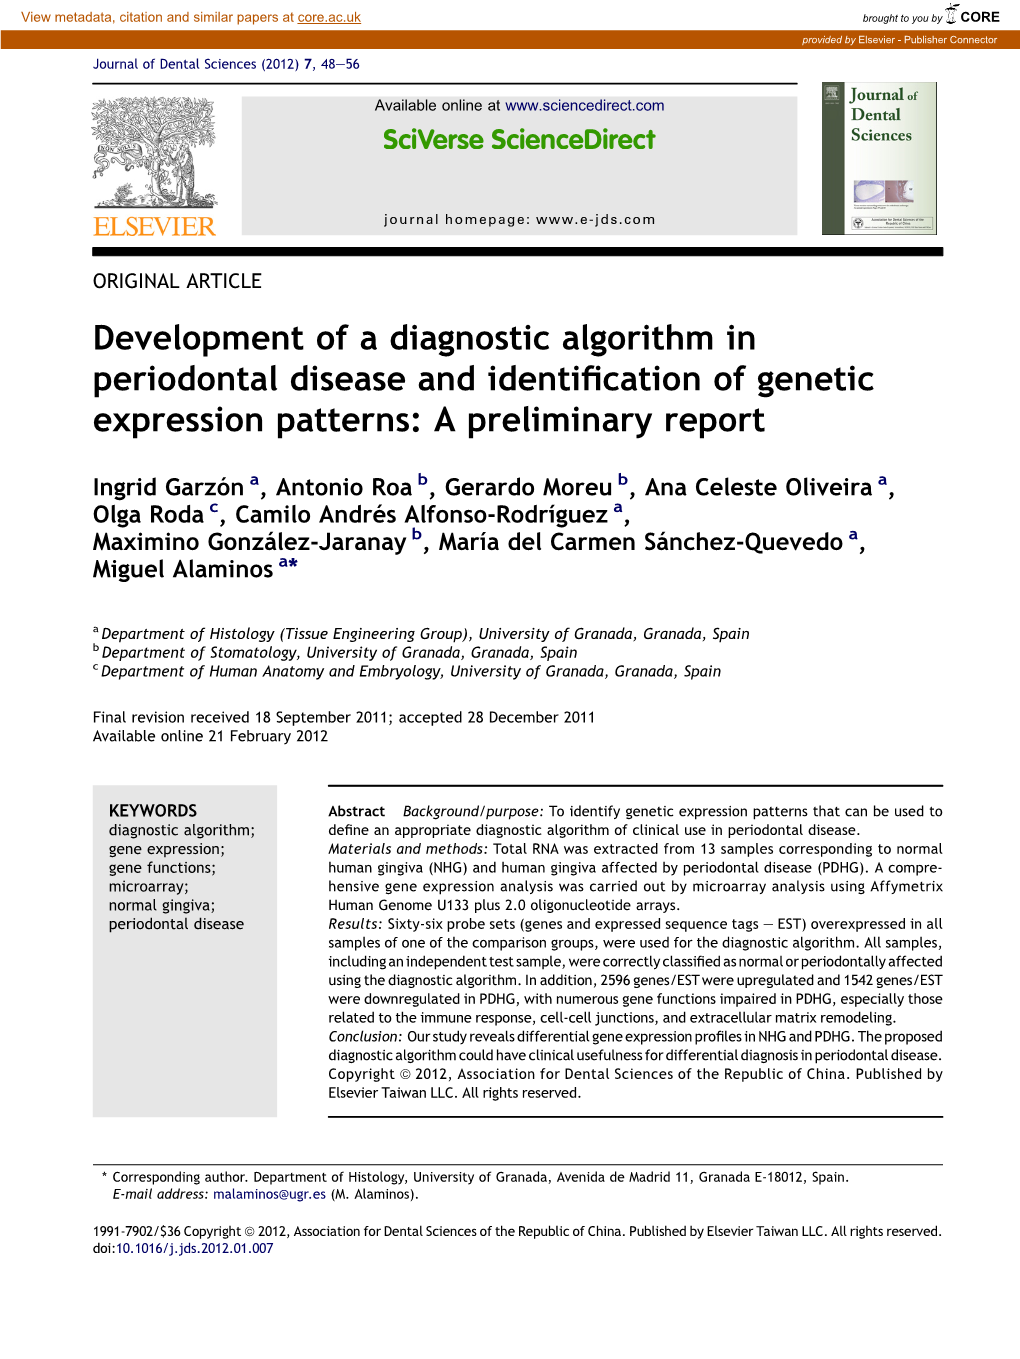 Development of a Diagnostic Algorithm in Periodontal Disease and Identiﬁcation of Genetic Expression Patterns: a Preliminary Report